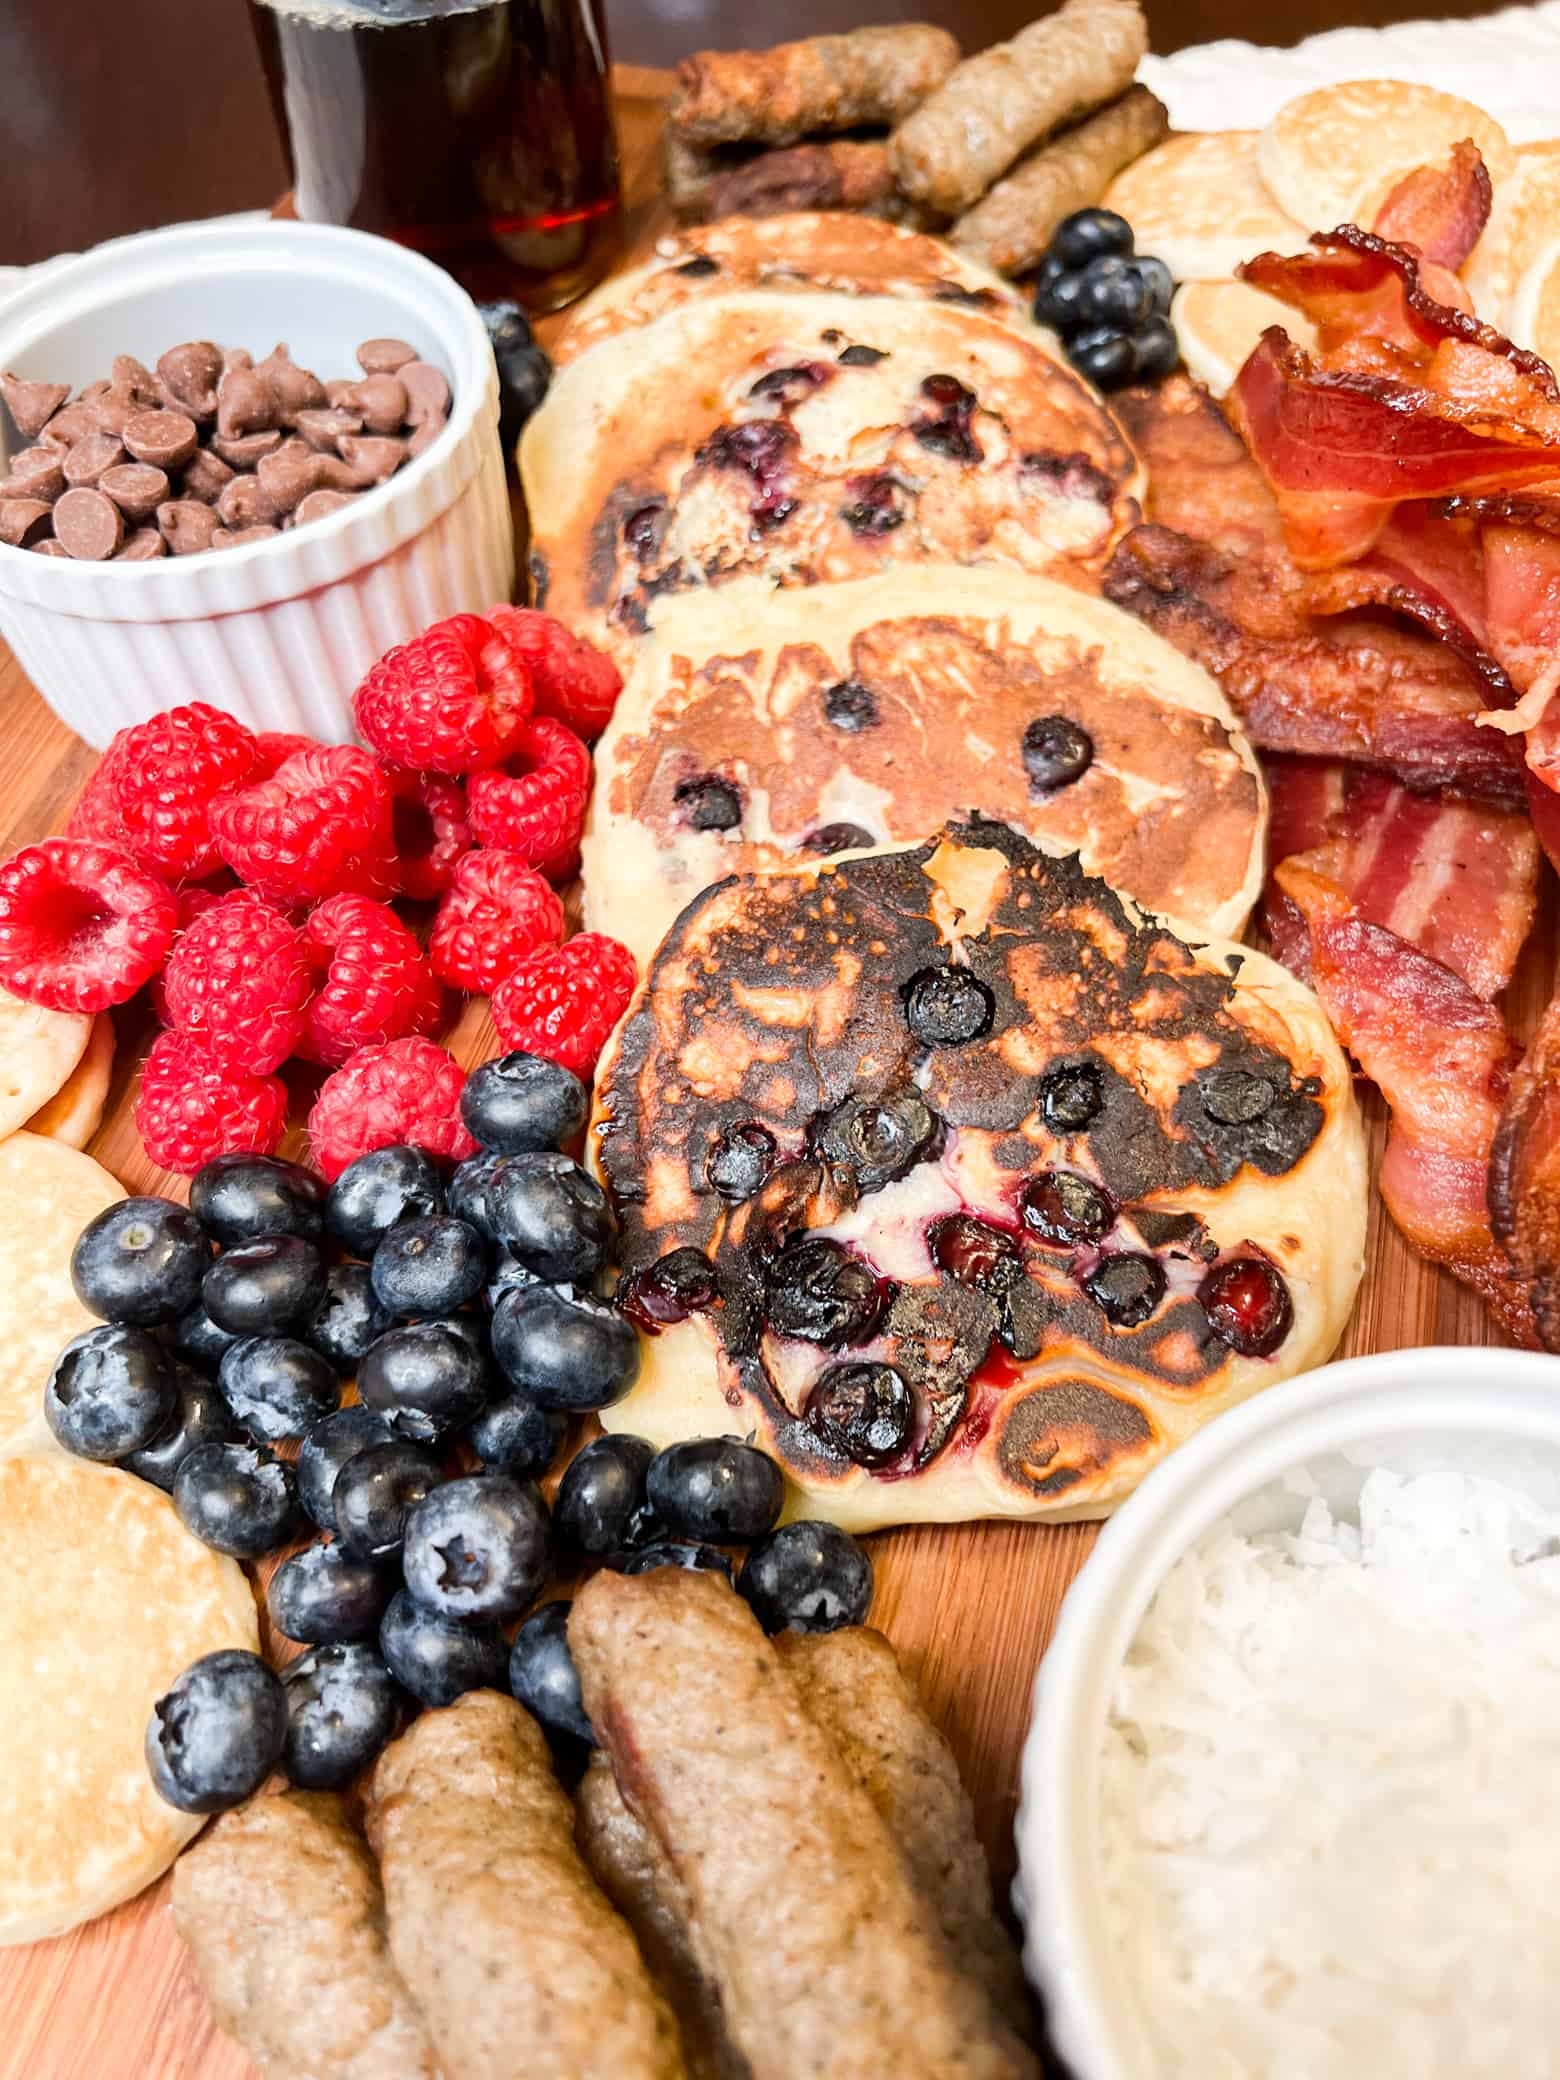 close up of a charcuterie board of breakfast items including pancakes, sausage. bacon, berries, and chocolate chips